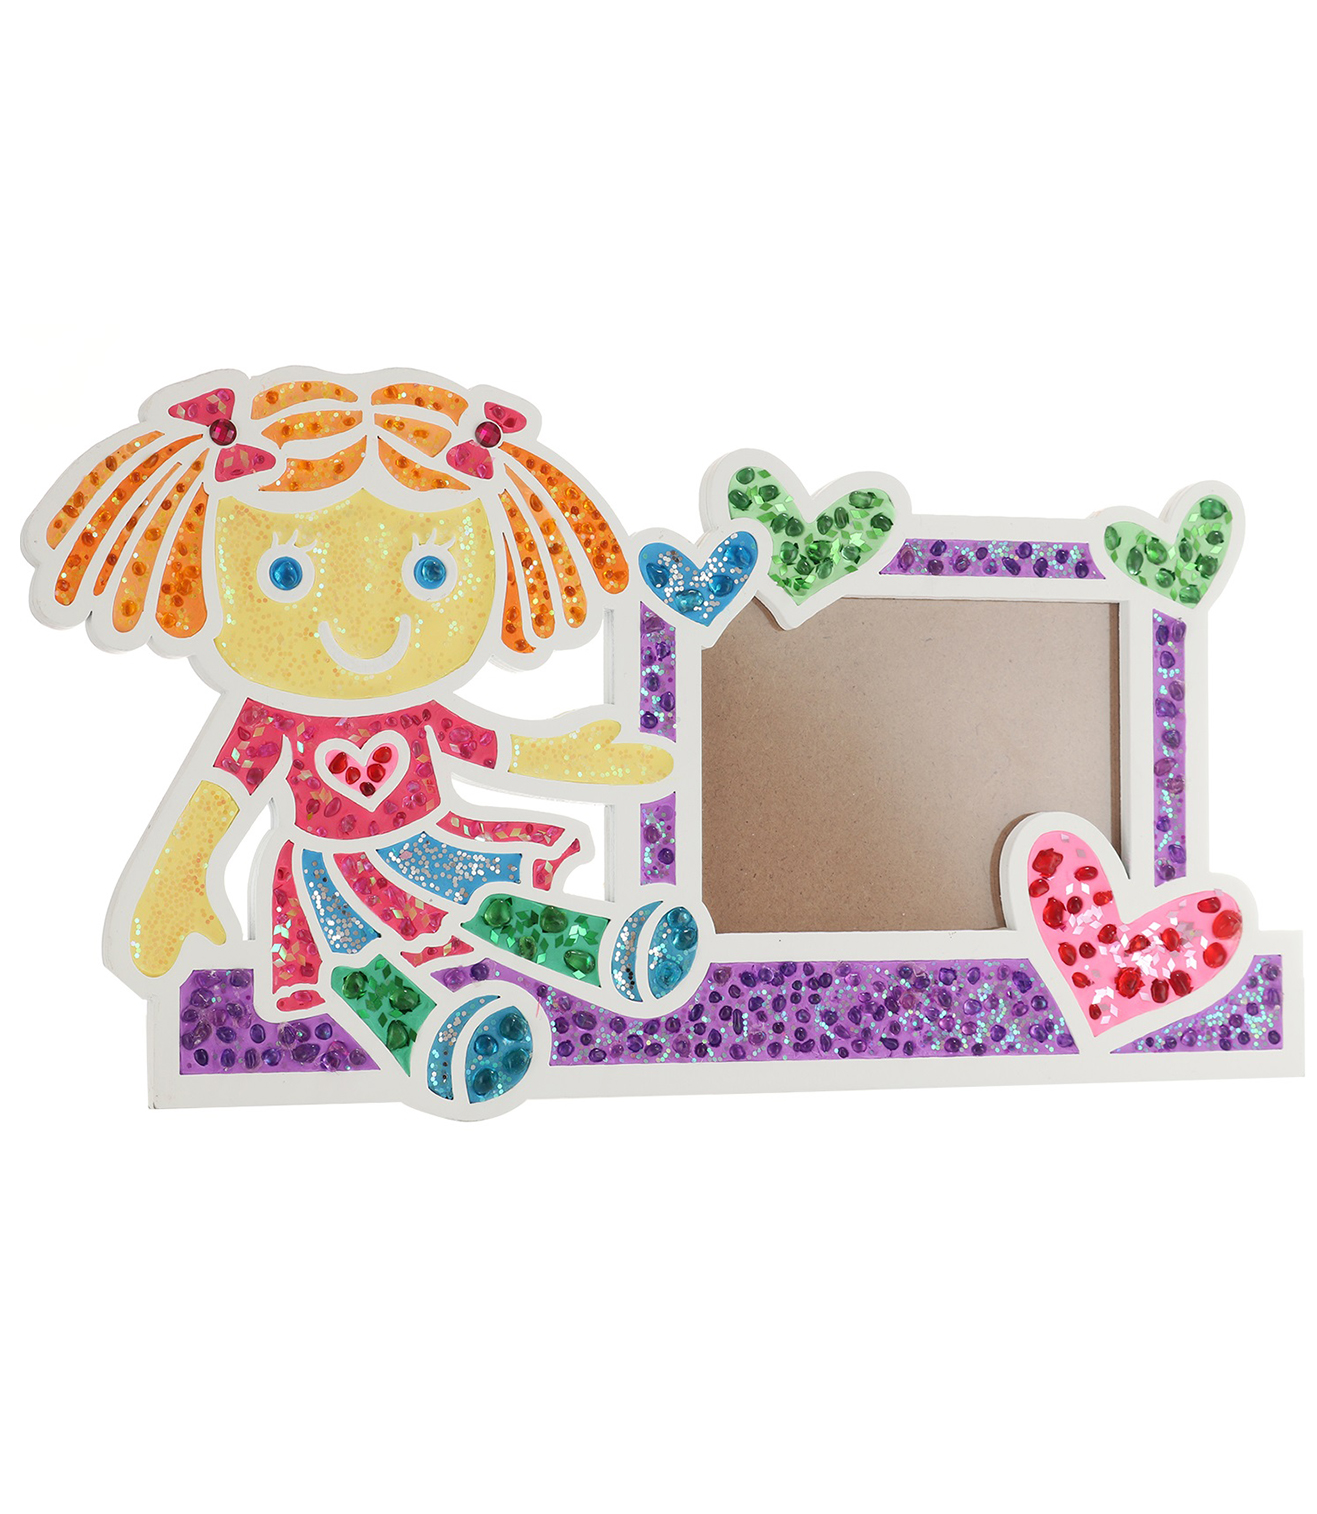 ClayArt Doll Picture Frame